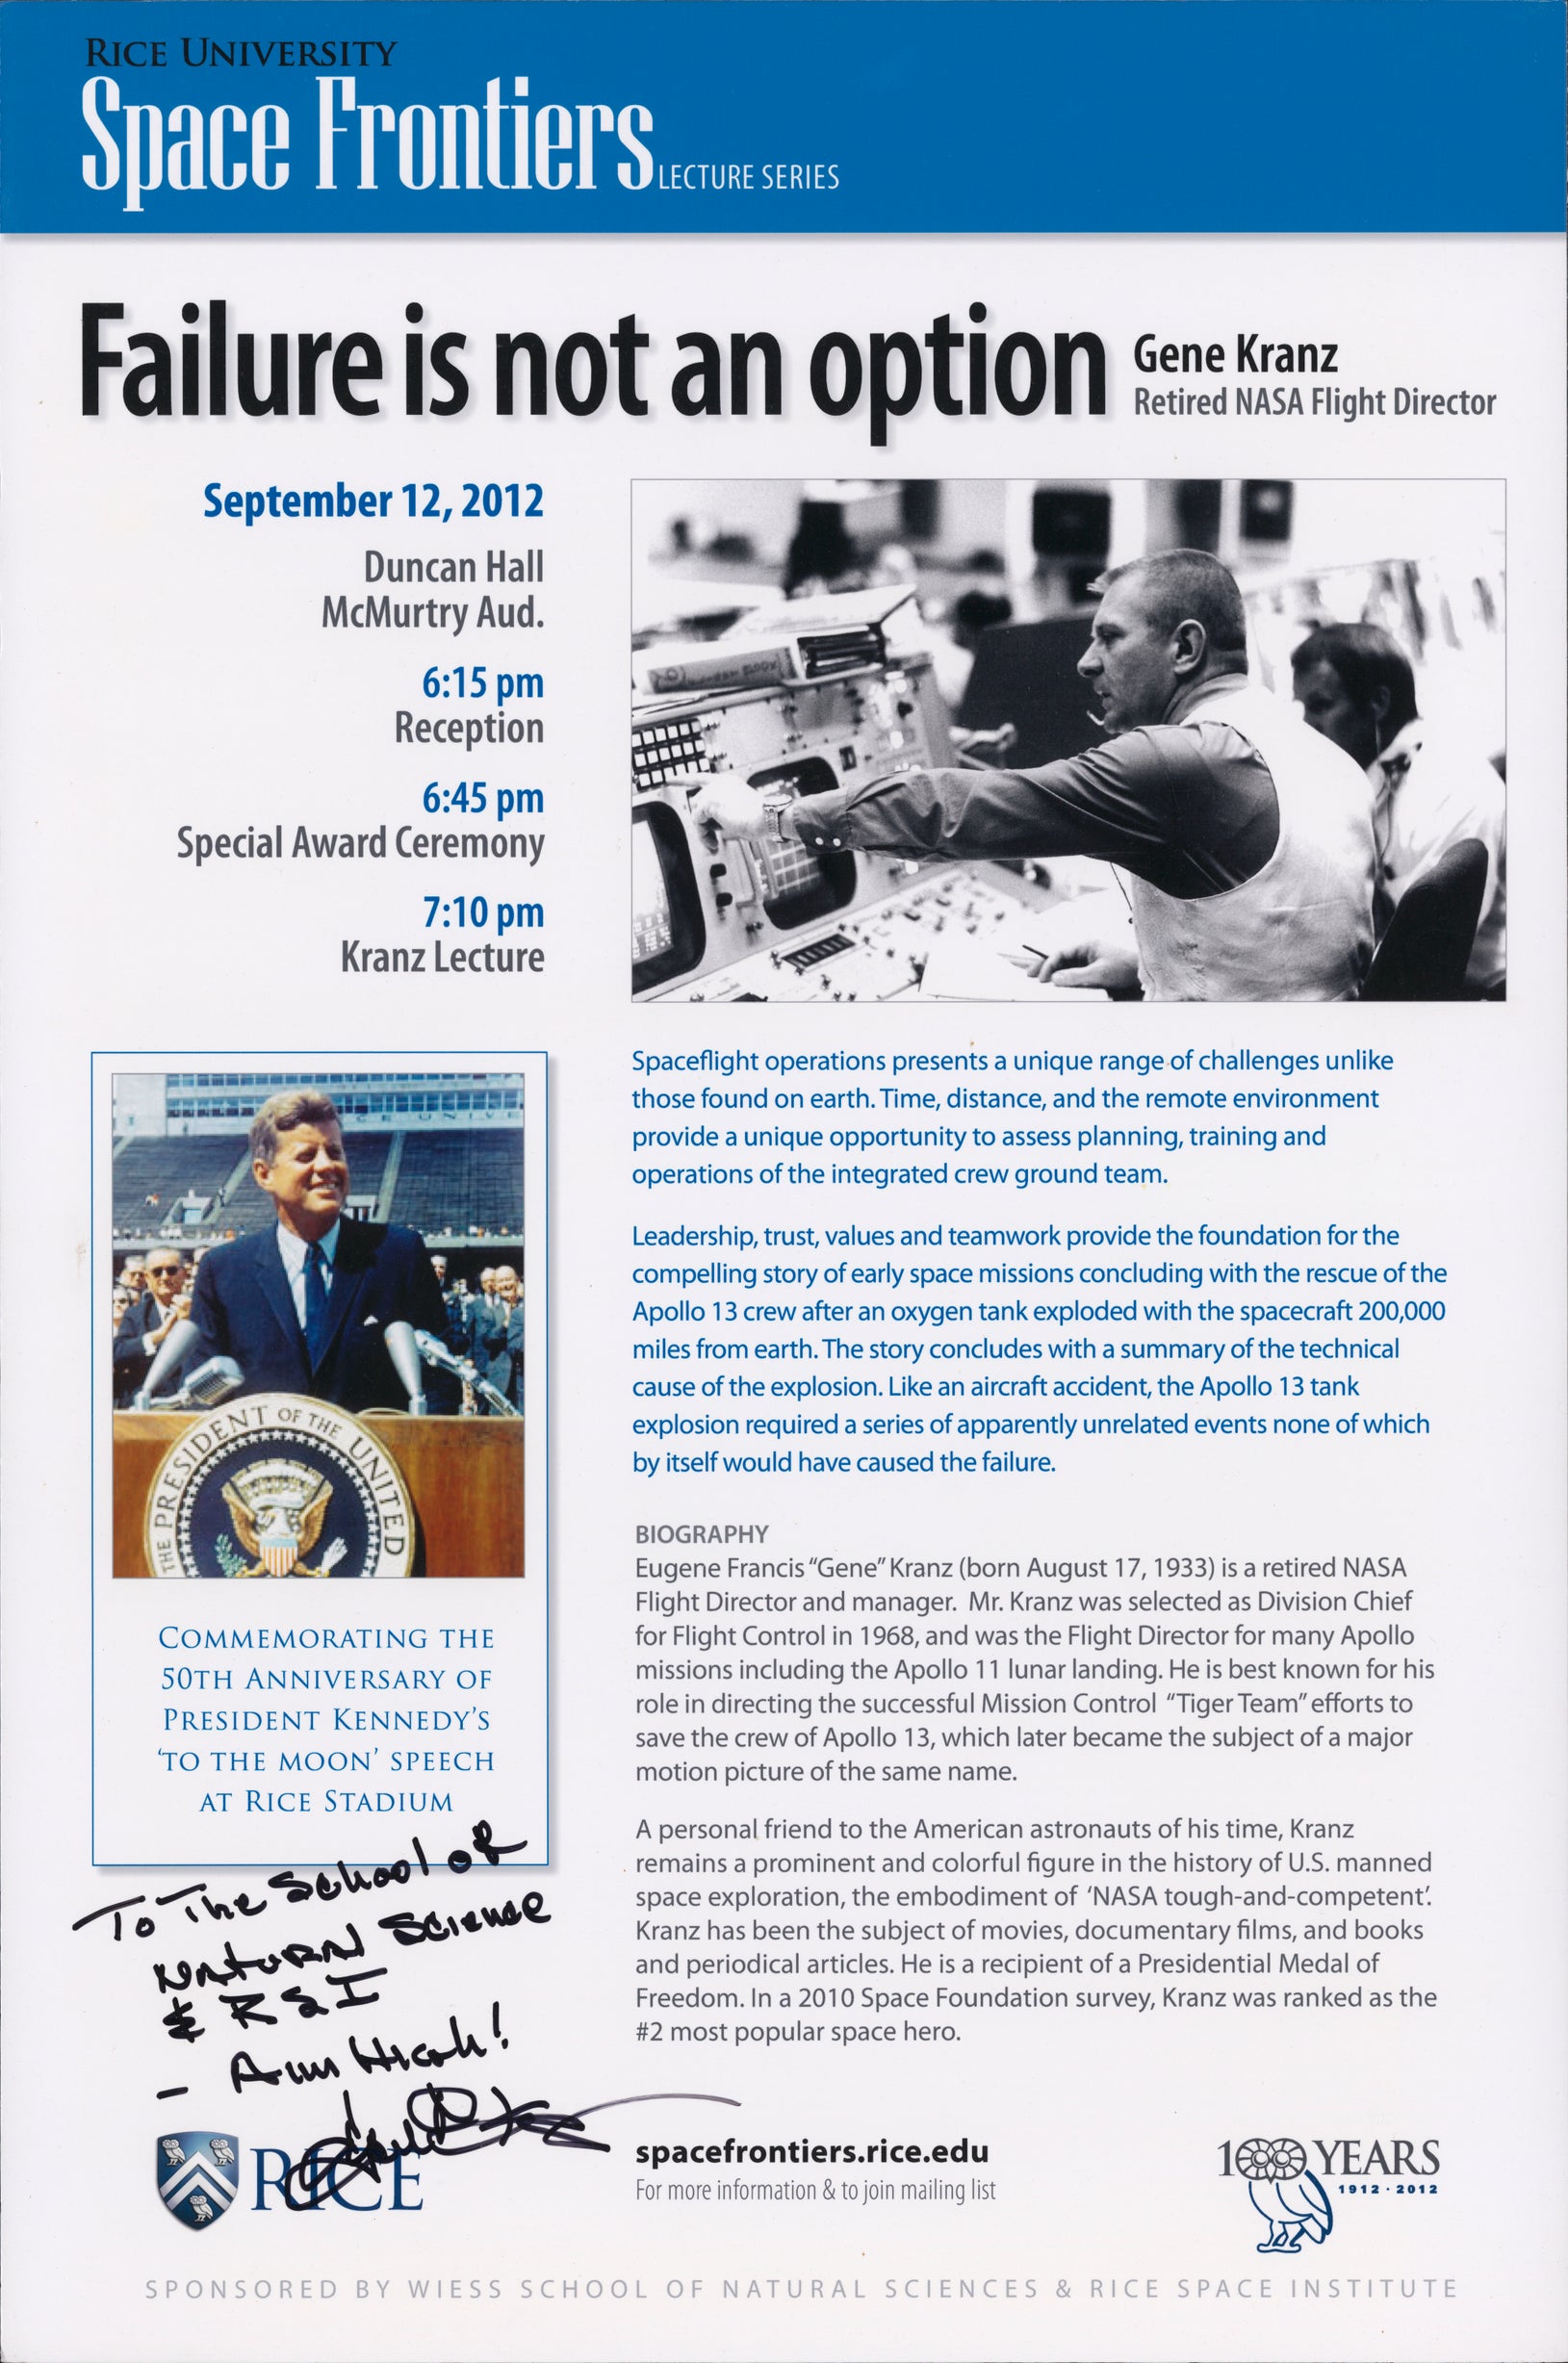 Poster of "Failure is Not an Option" by Gene Kranz